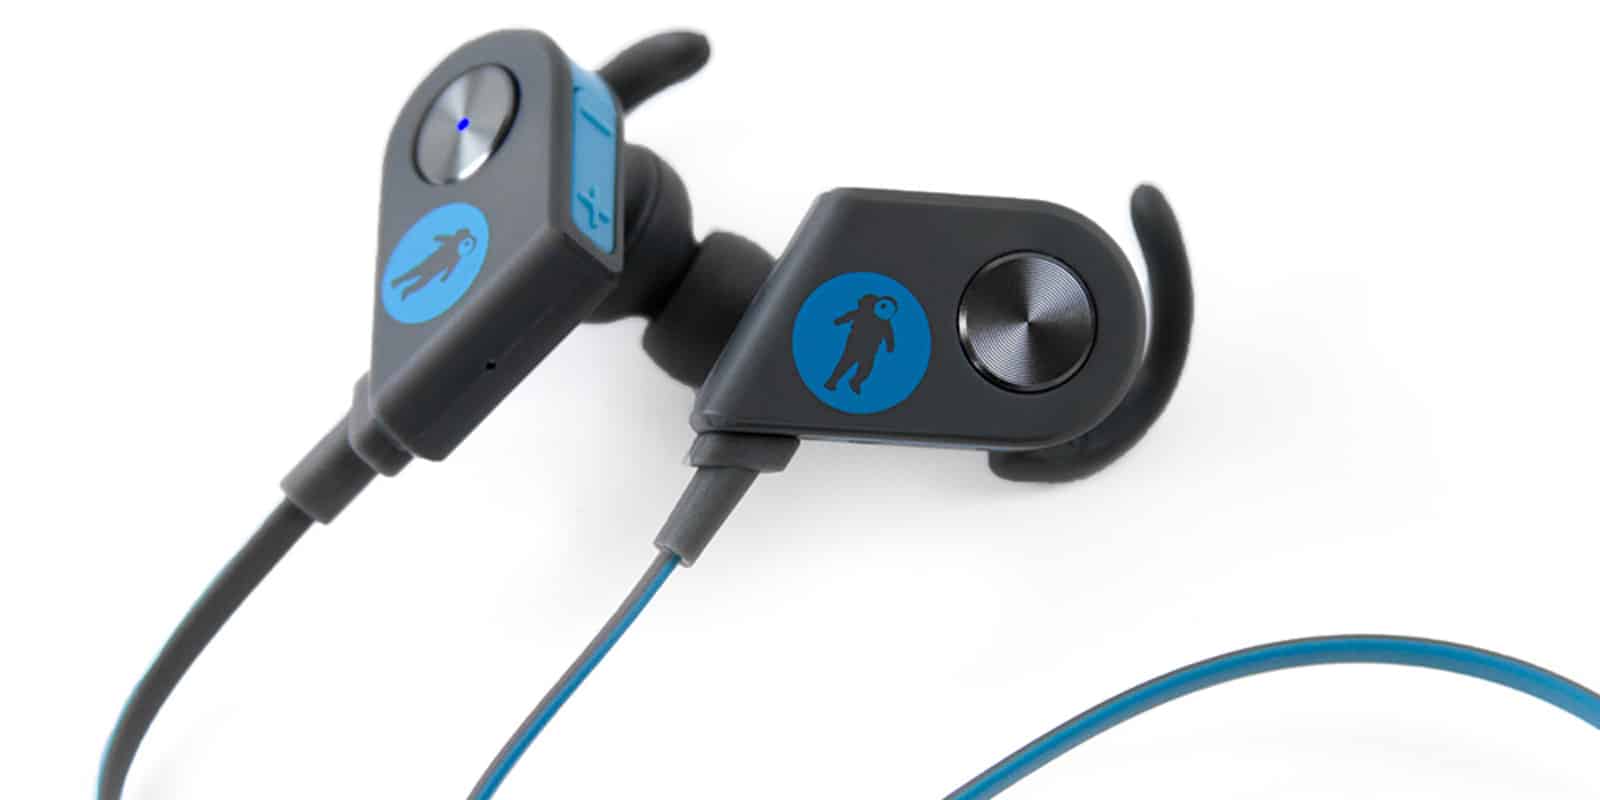 These earbuds combine ultra resilience with long battery life and a sweet design.